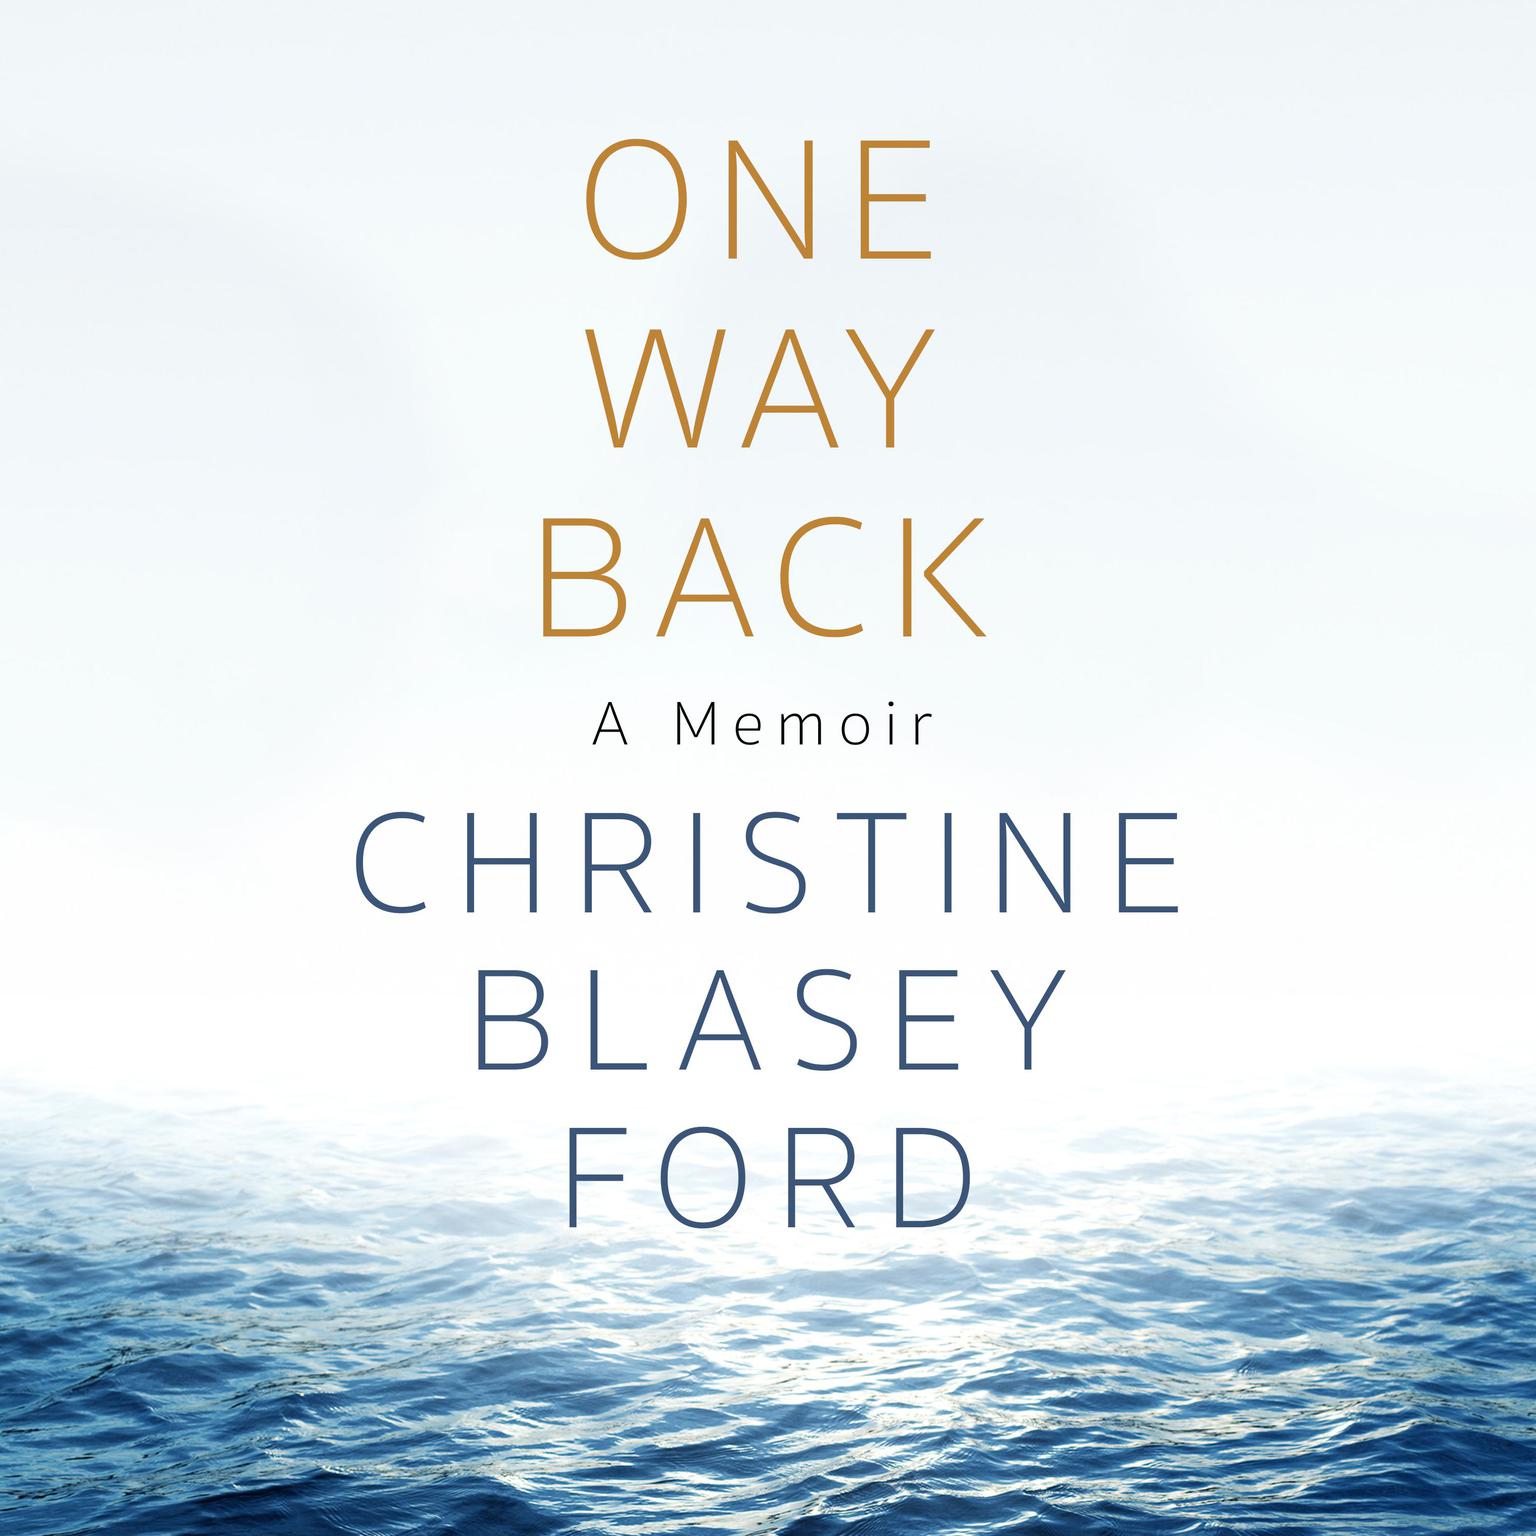 One Way Back: A Memoir Audiobook, by Christine Blasey Ford